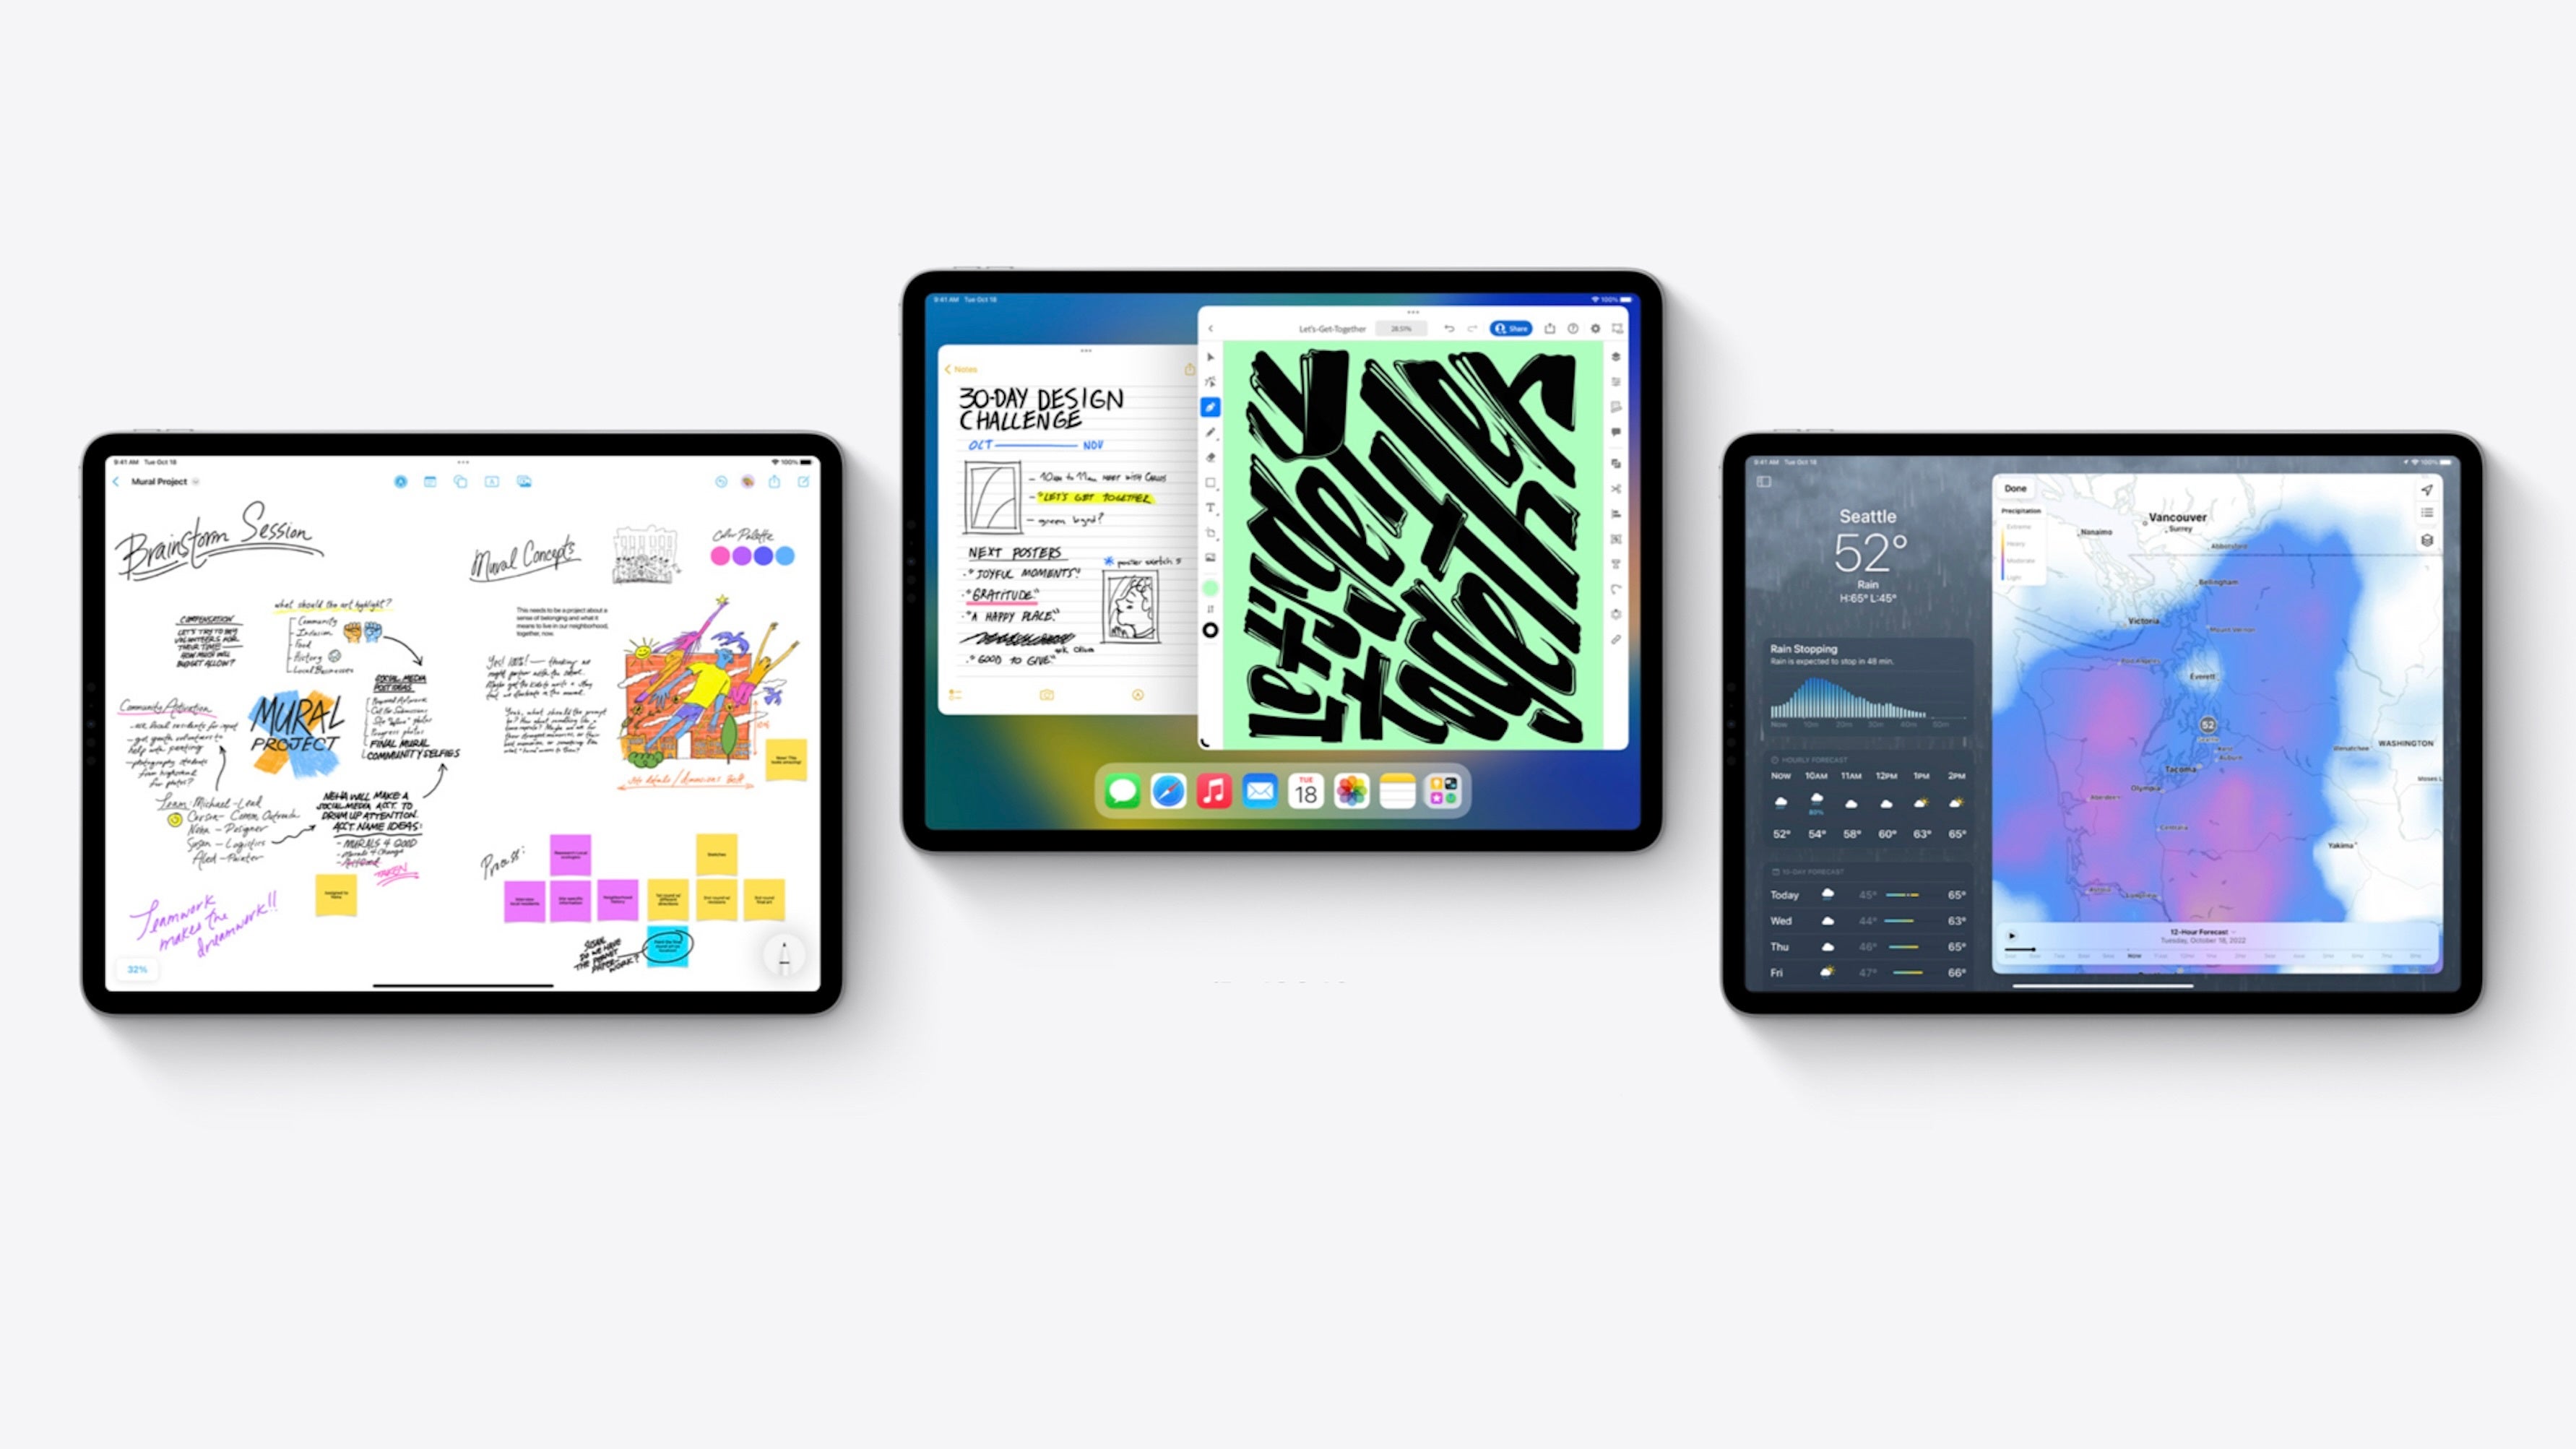 The iPad problem: Why Apple won't let tablets reach their full potential